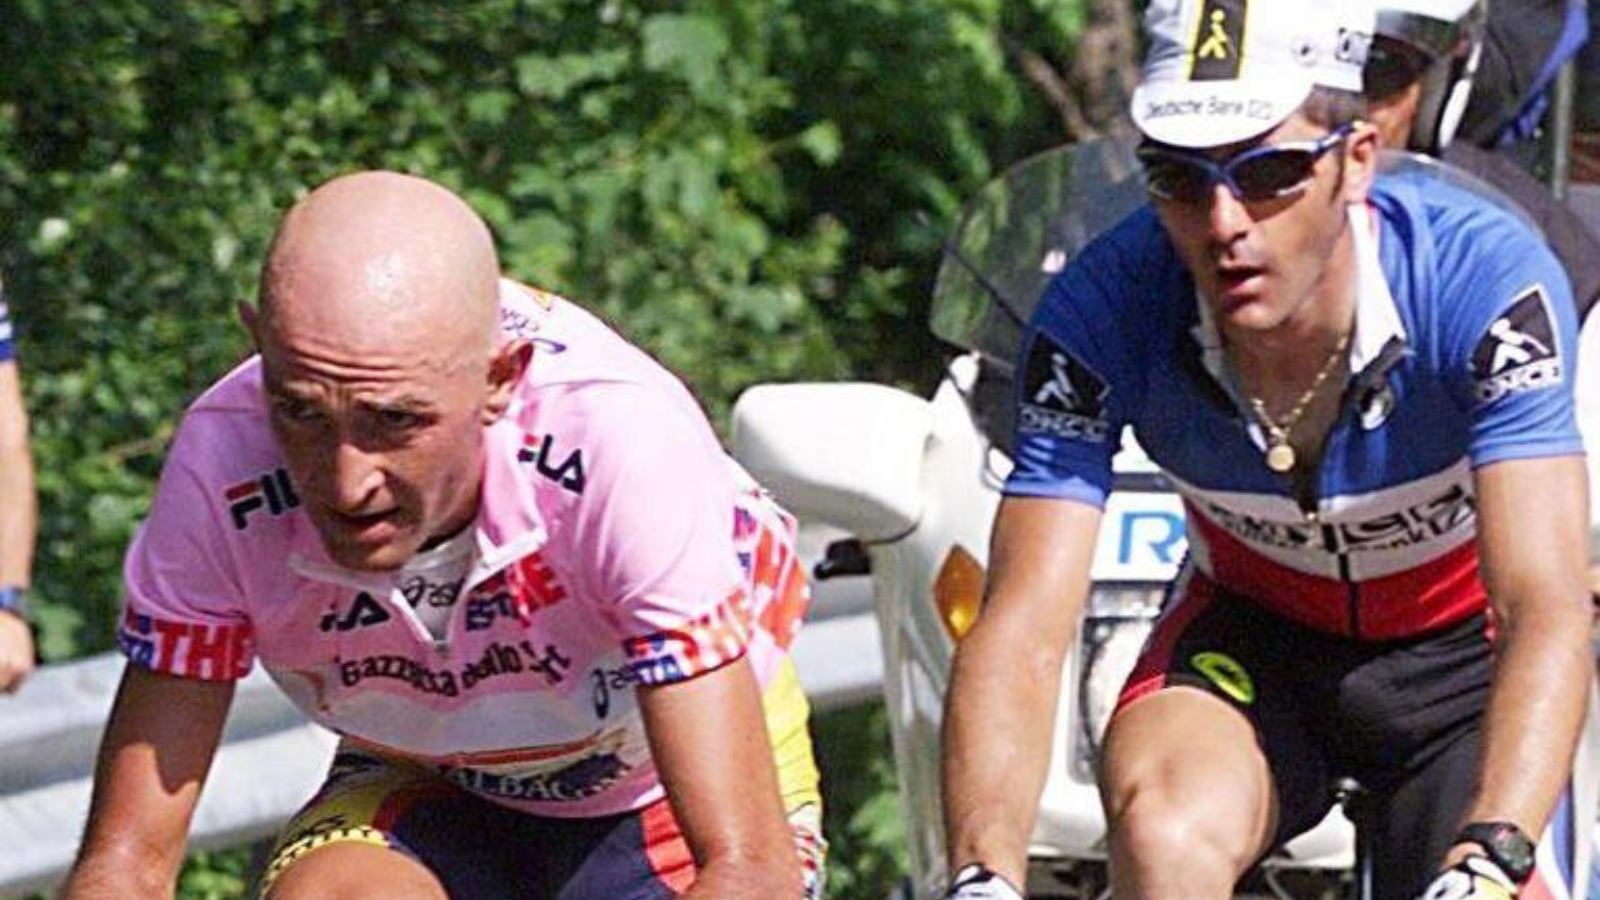 Marco Pantani and Laurent Jalabert climbing Oropa in the 15th stage of Giro d'Itali 1999.